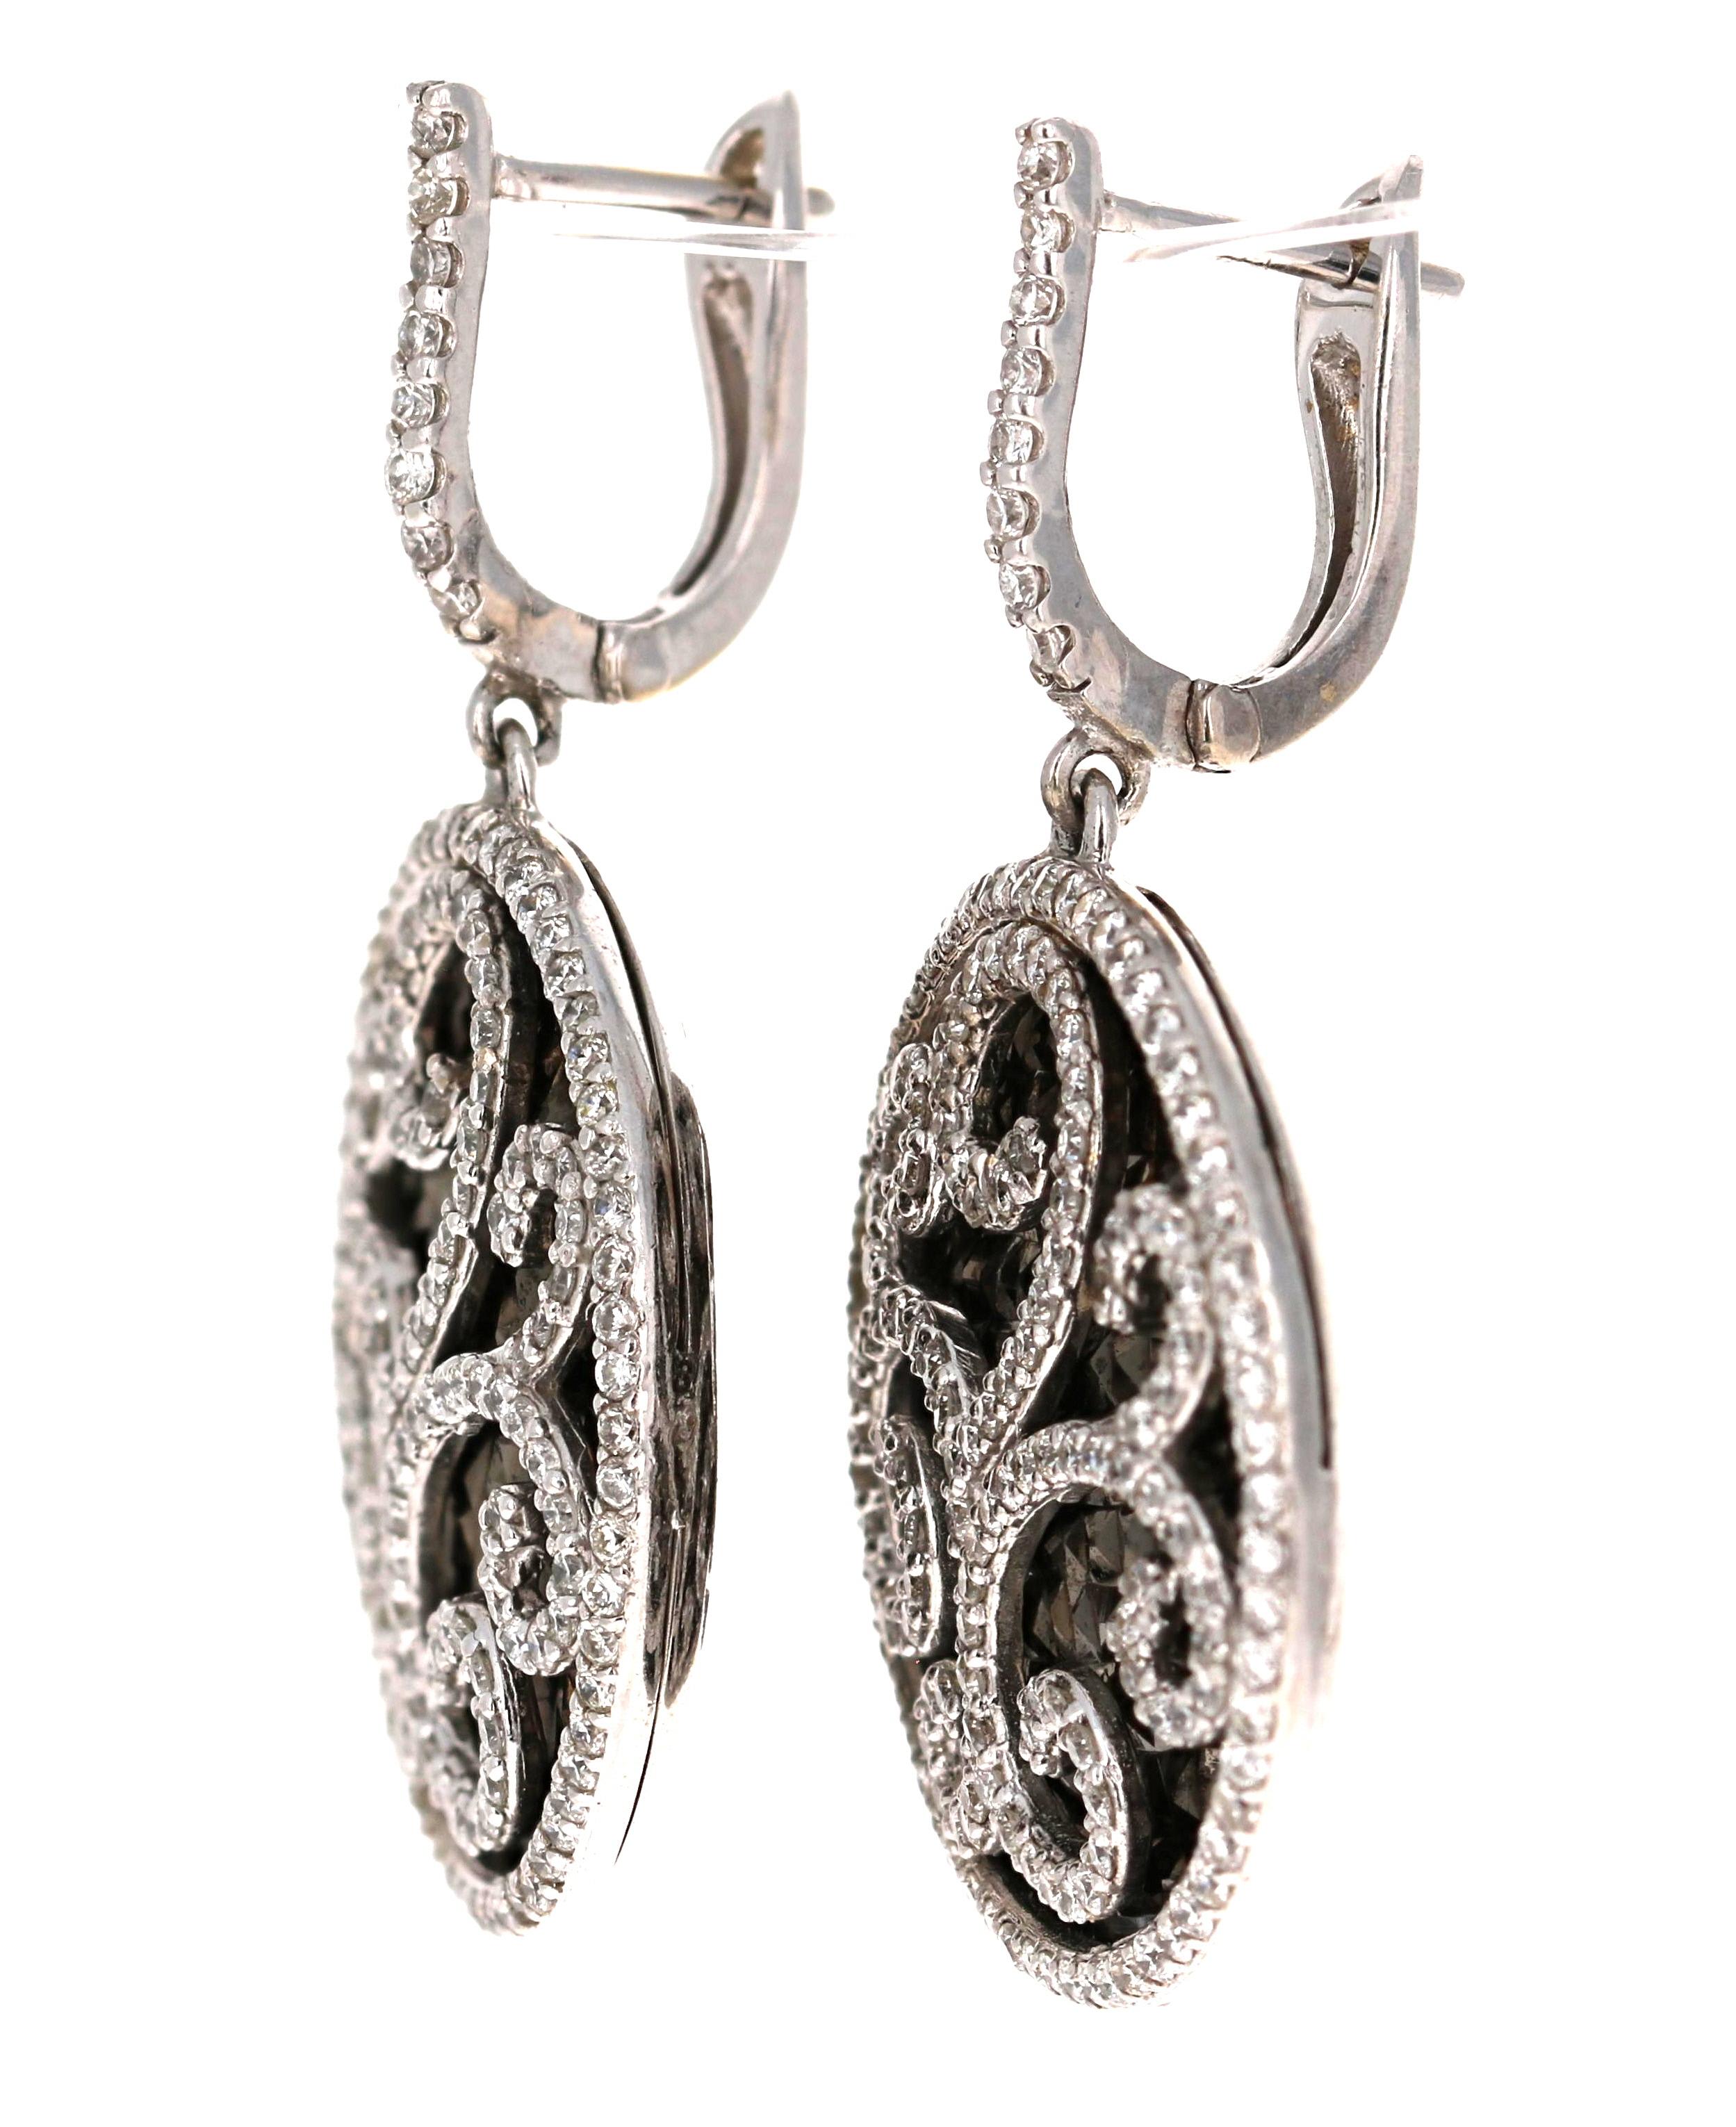 These gorgeous Earrings are a true master piece, the design is unique and a definite show stopper!! A great addition to your accessory collection. 

The Earrings have 329 Round Cut Diamonds that weigh 1.74 Carats (Clarity: SI, Color: F) and is set